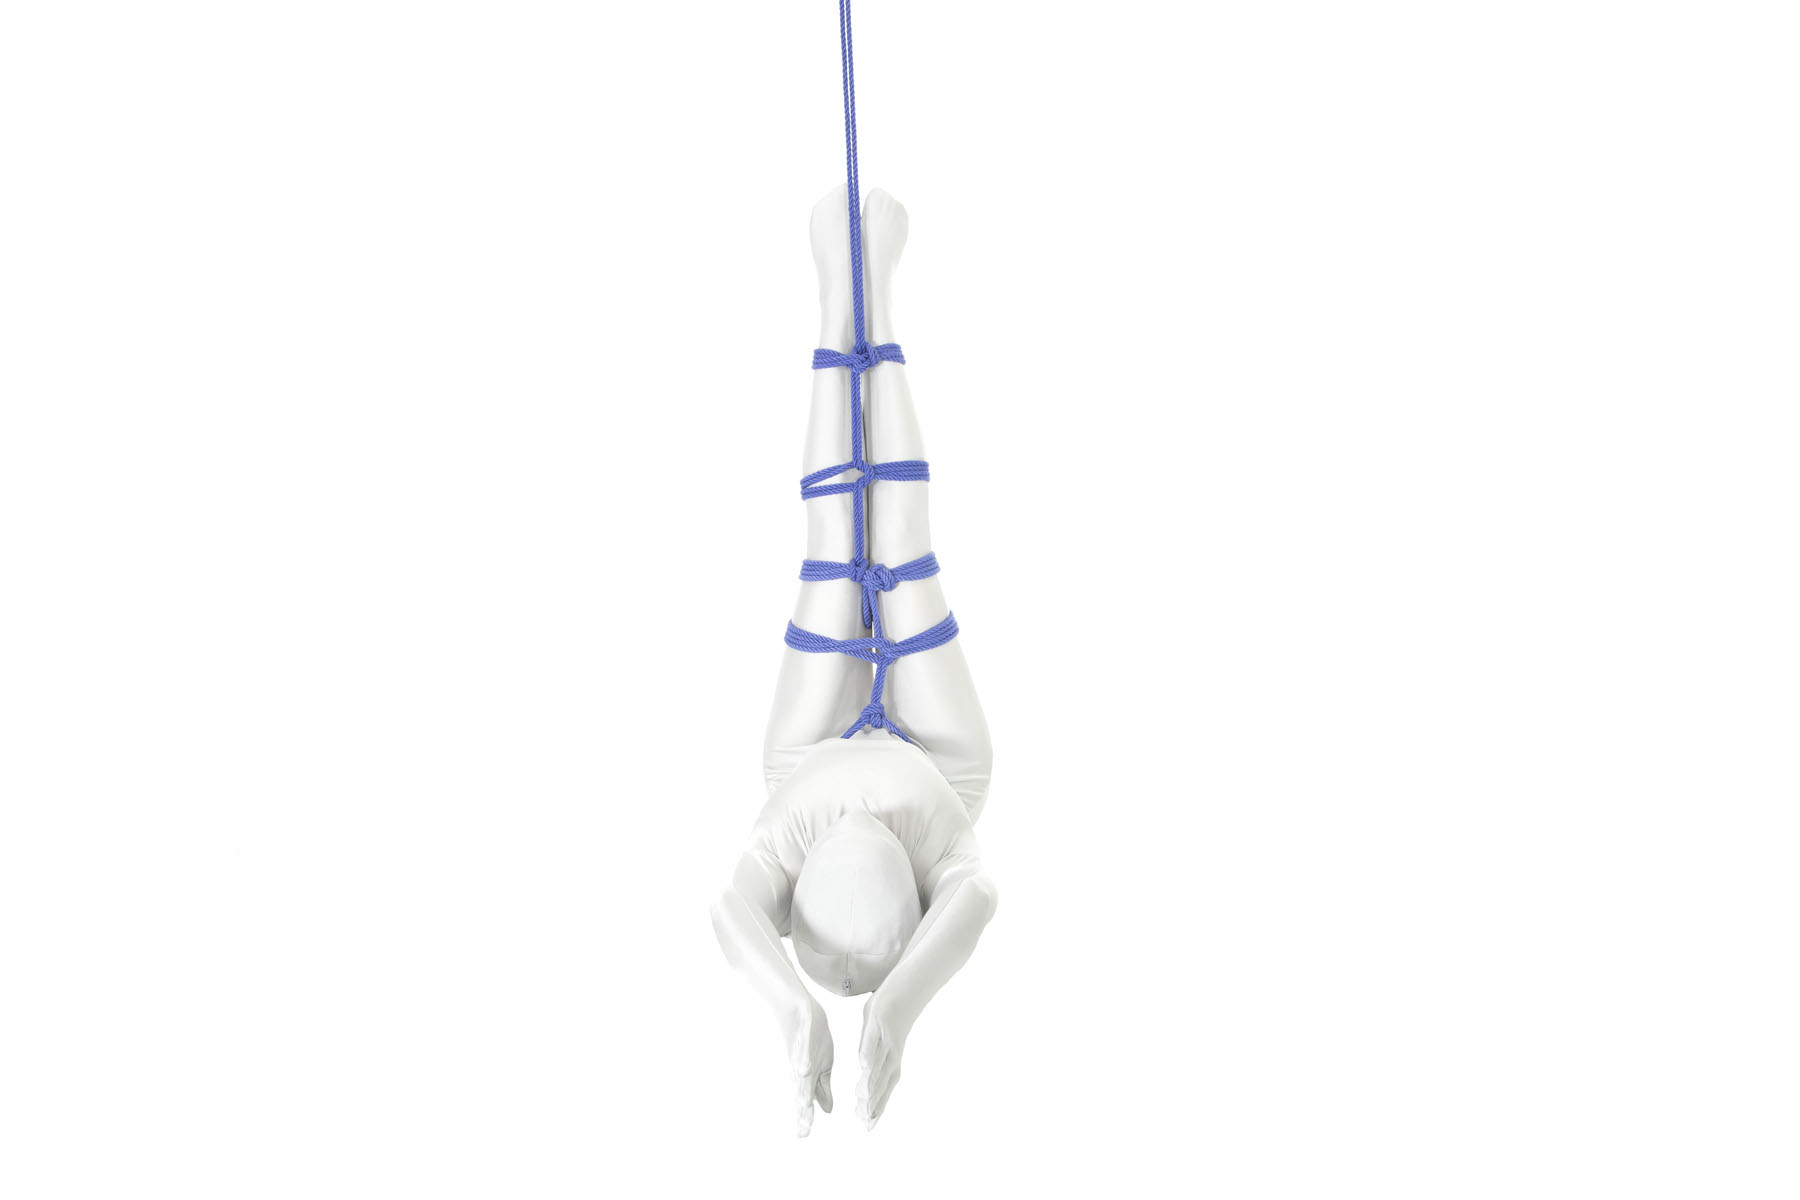 A person in a white bodysuit is lying on their back with their legs straight up in the air. The legs are tied together with a ladder consisting of a series of plus-shaped rungs. The ladder is attached at the ankles to an out-of-frame point in the ceiling.